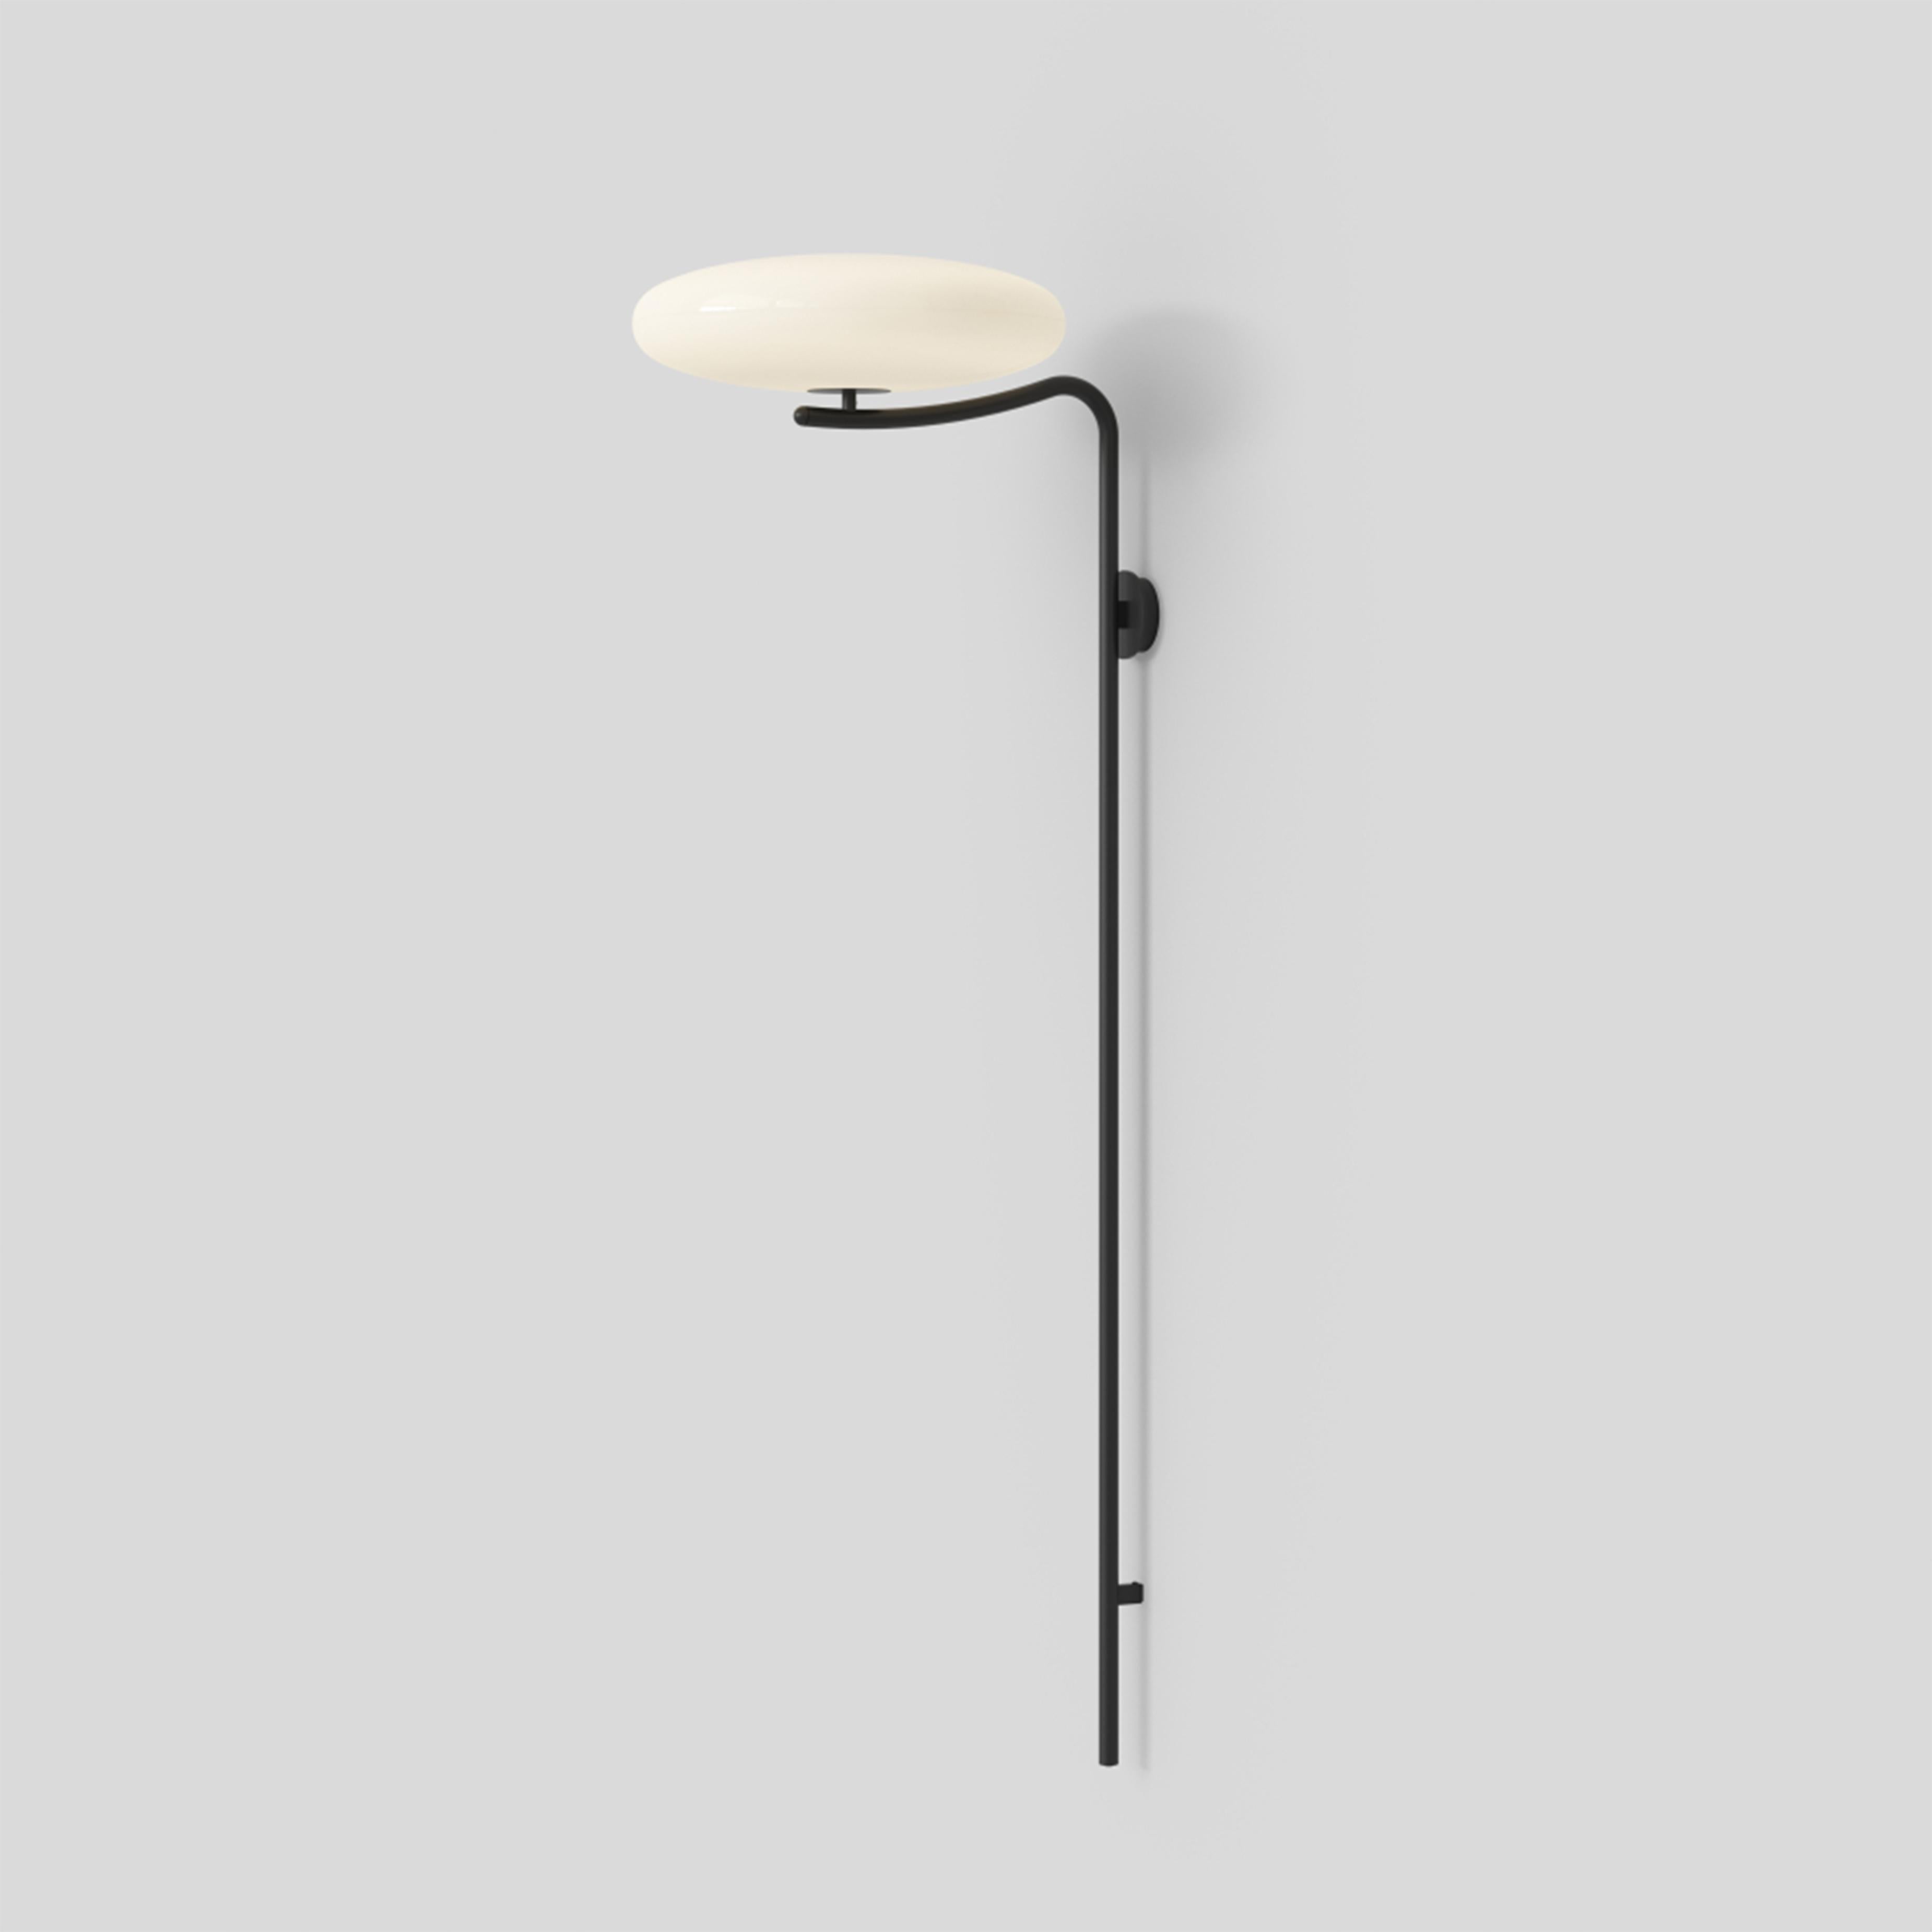 Gino Sarfatti wall lamp Model 2065 wall.
White diffuser, black structure.
Manufactured by Astep

Model 2065
Design by Gino Sarfatti
The 2065 is made of two joined opaline methacrylate saucer-shaped diffusers suspended from the ceiling with a